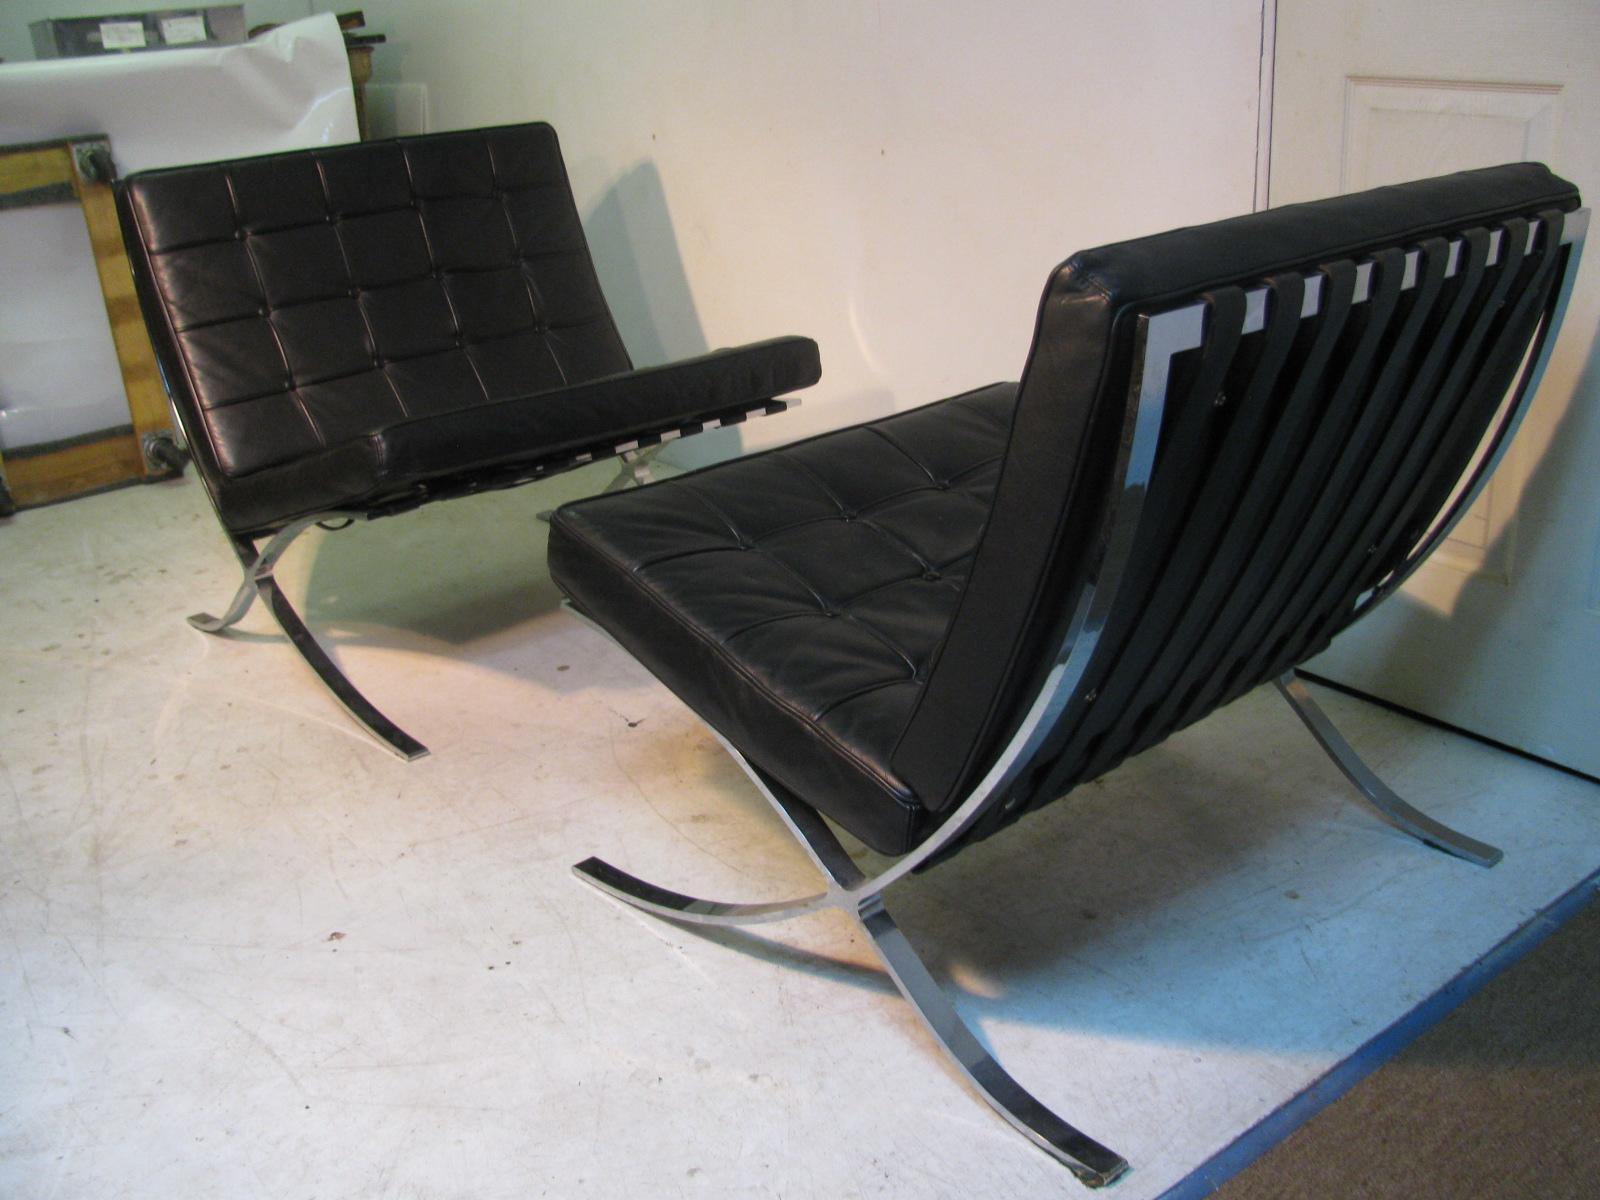 Iconic chairs by Ludwig Mies van der Rohe for Knoll. Great condition with 3 buttons that have been replaced on the seat cushions. Chrome frames with dovetail construction, cushions are spinnybeck leather. Chairs are from circa 1970. Chairs are not